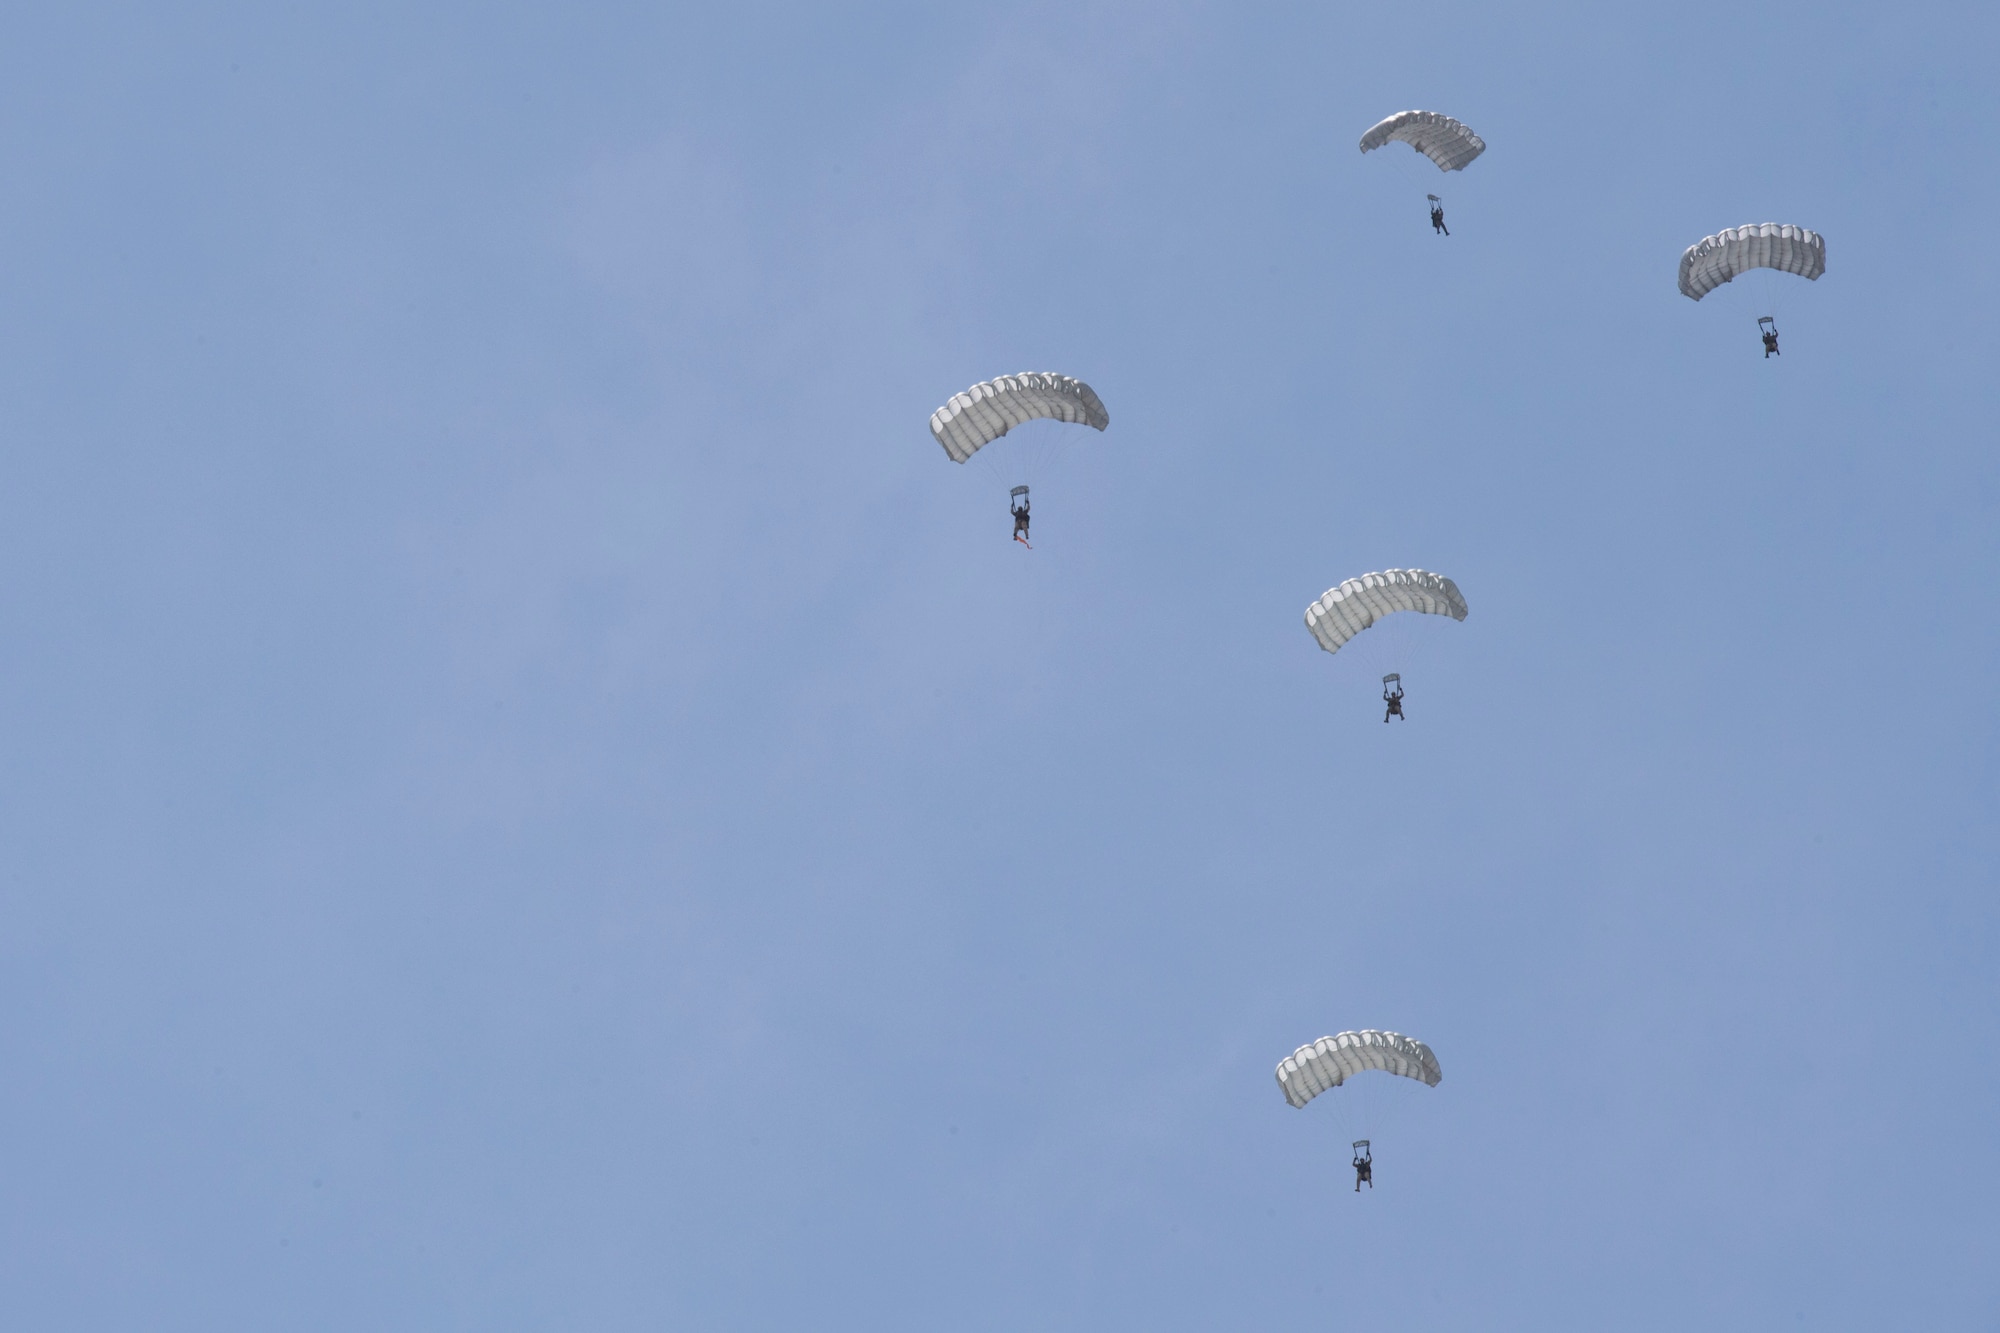 Hellenic paratroopers conduct High Altitude Low Opening jumps during exercise Stolen Cerberus V, over Megara Drop Zone, Greece, May 15, 2018. The United States and Greece share a commitment to promote peace and stability in the European theater, and continue to seek opportunities to develop strong relationships. (U.S. Air Force photo by Senior Airman Devin M. Rumbaugh)